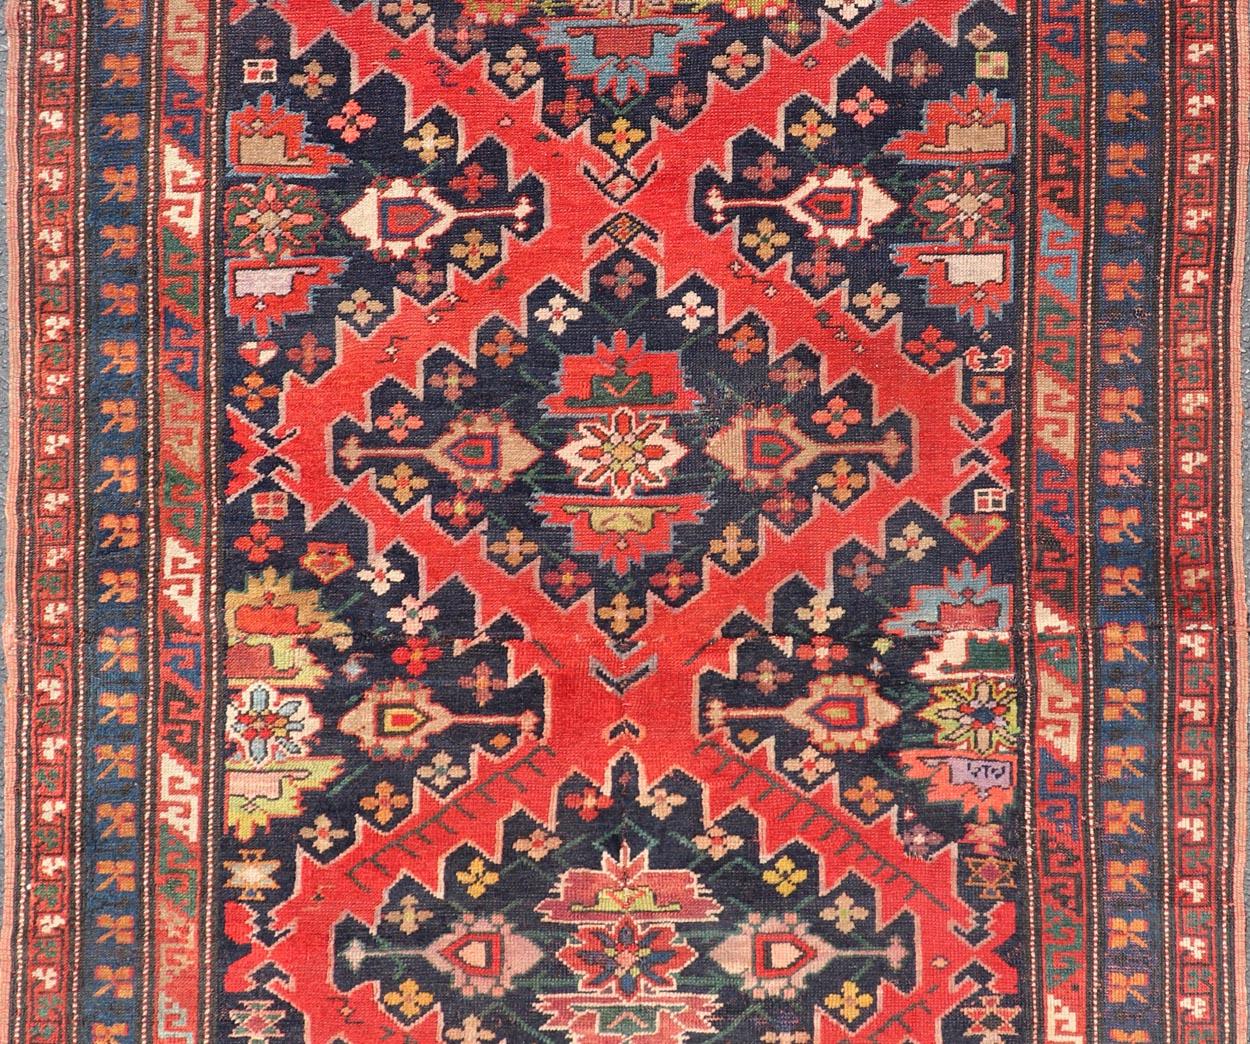 Antique Caucasian Kazak Rug with Sub-Geometric Medallions Design in Red and Blue For Sale 3